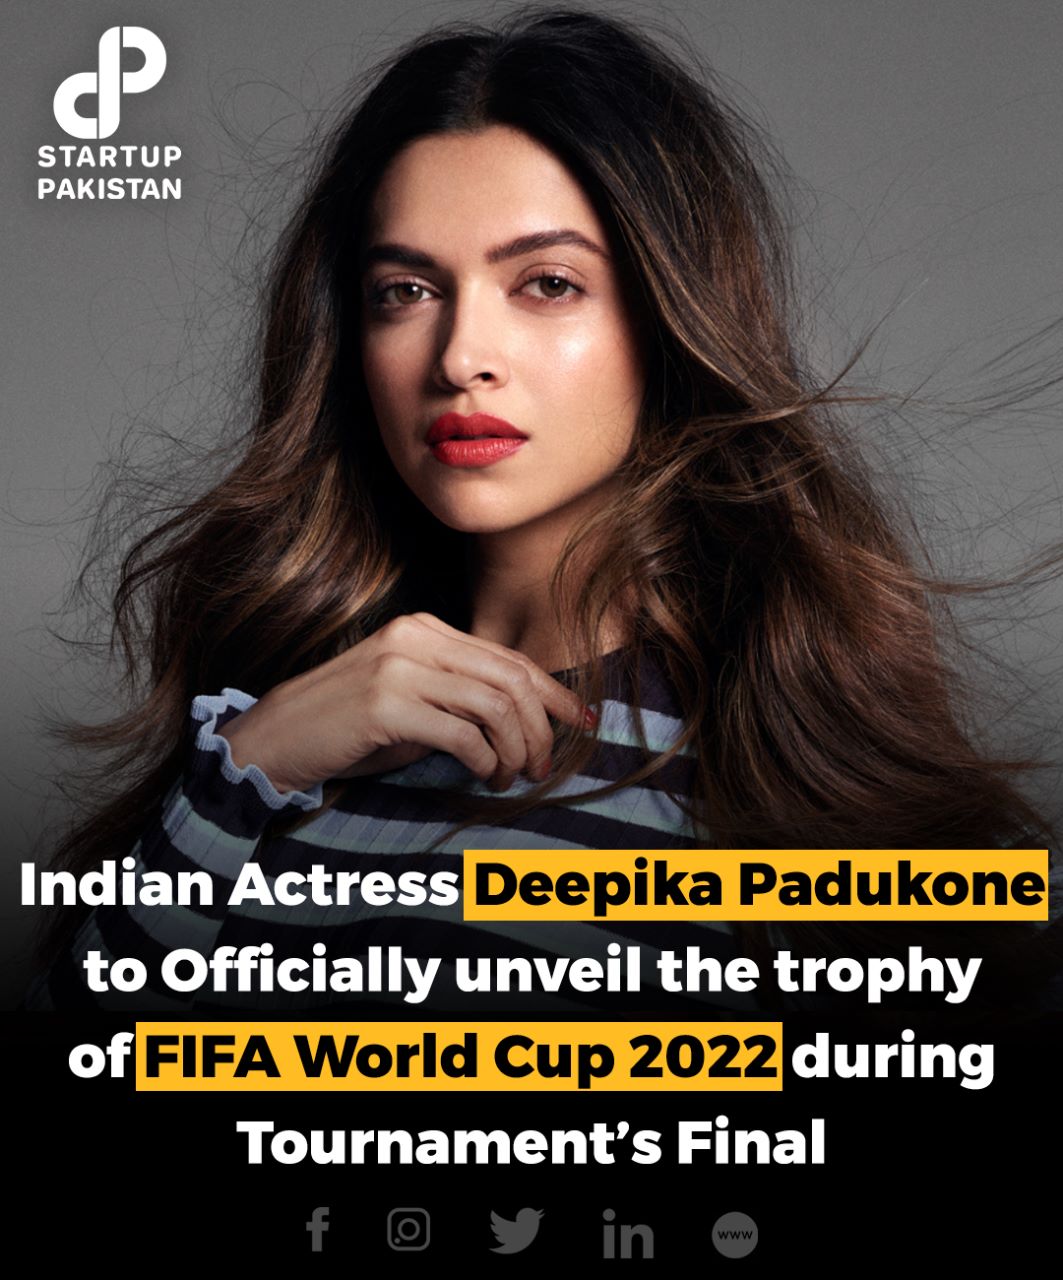 FIFA World Cup 2022: Deepika Padukone to unveil World Cup trophy